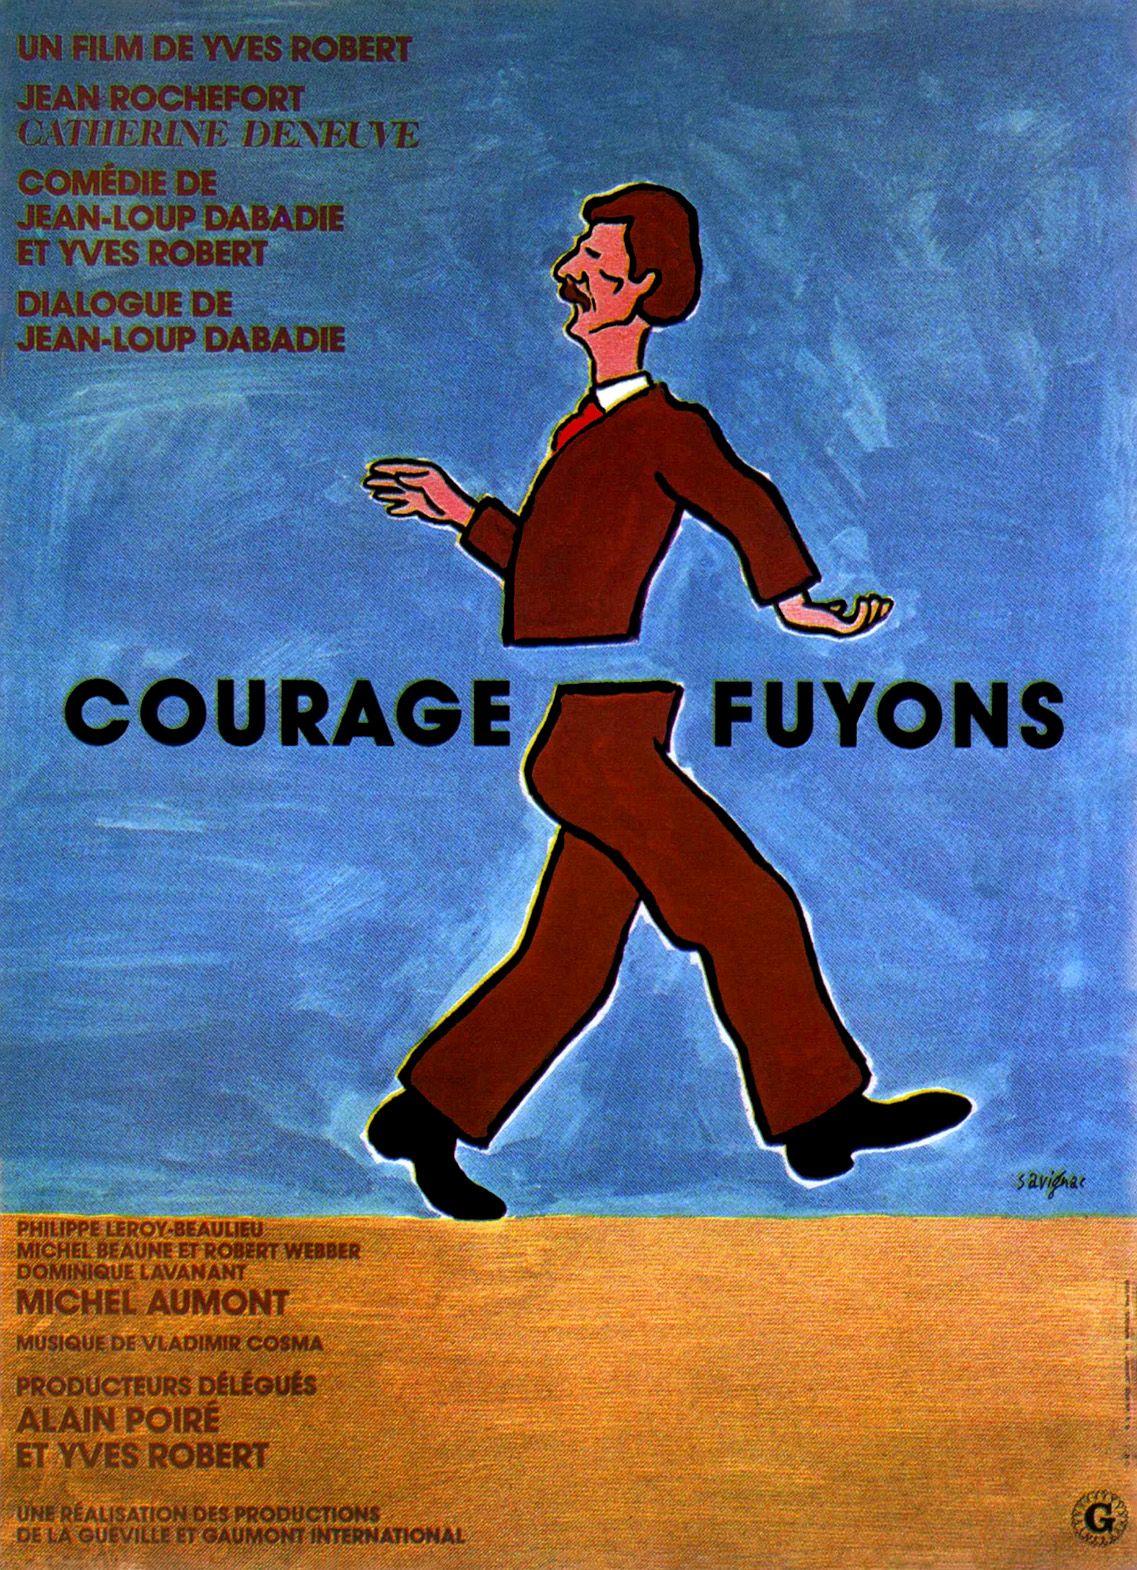 Courage_fuyons.jpg